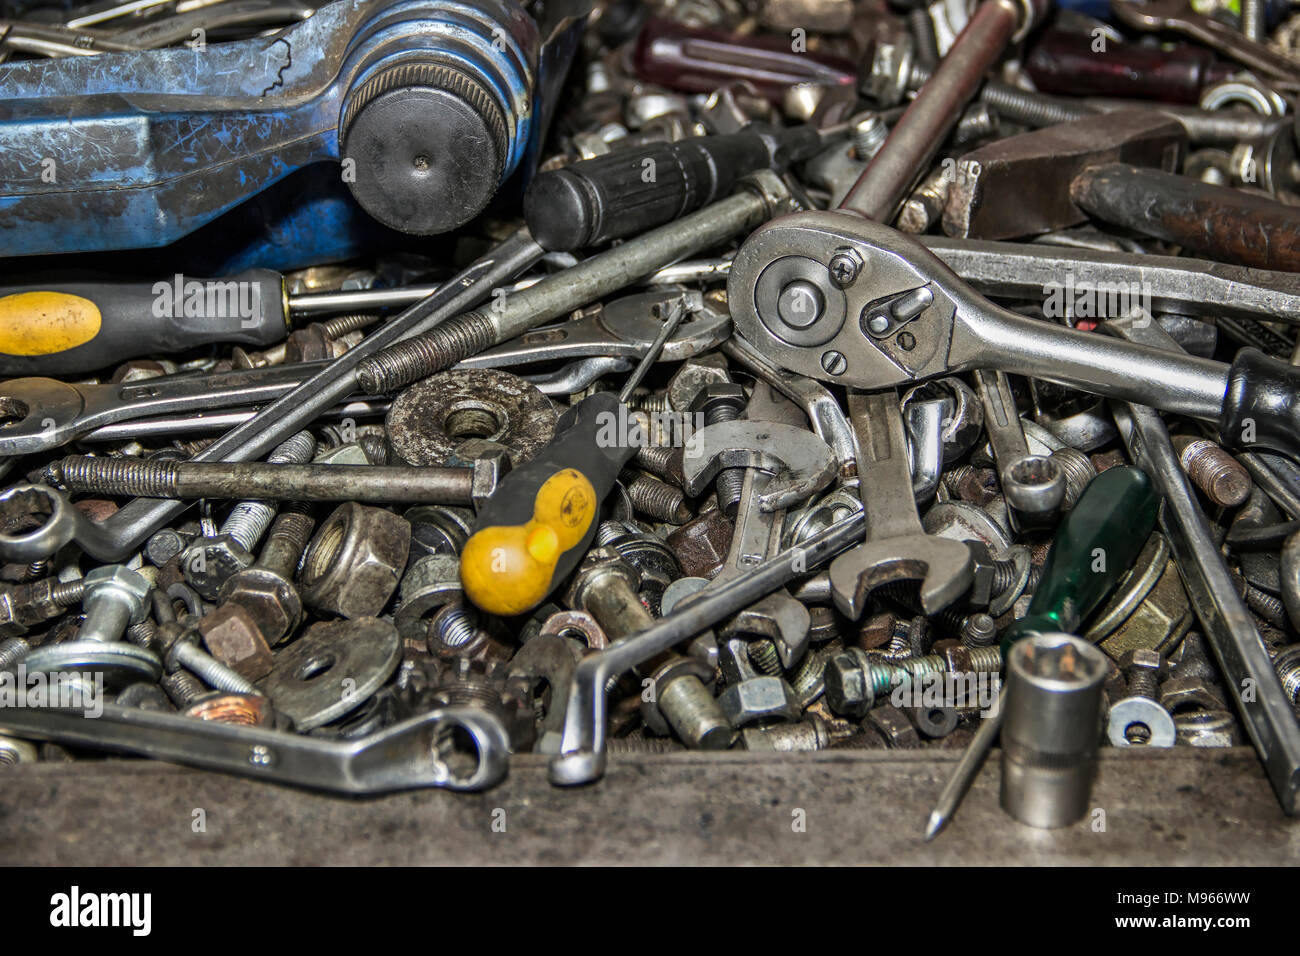 Bunch of messy hand tools in an auto mechanic garage Stock Photo - Alamy